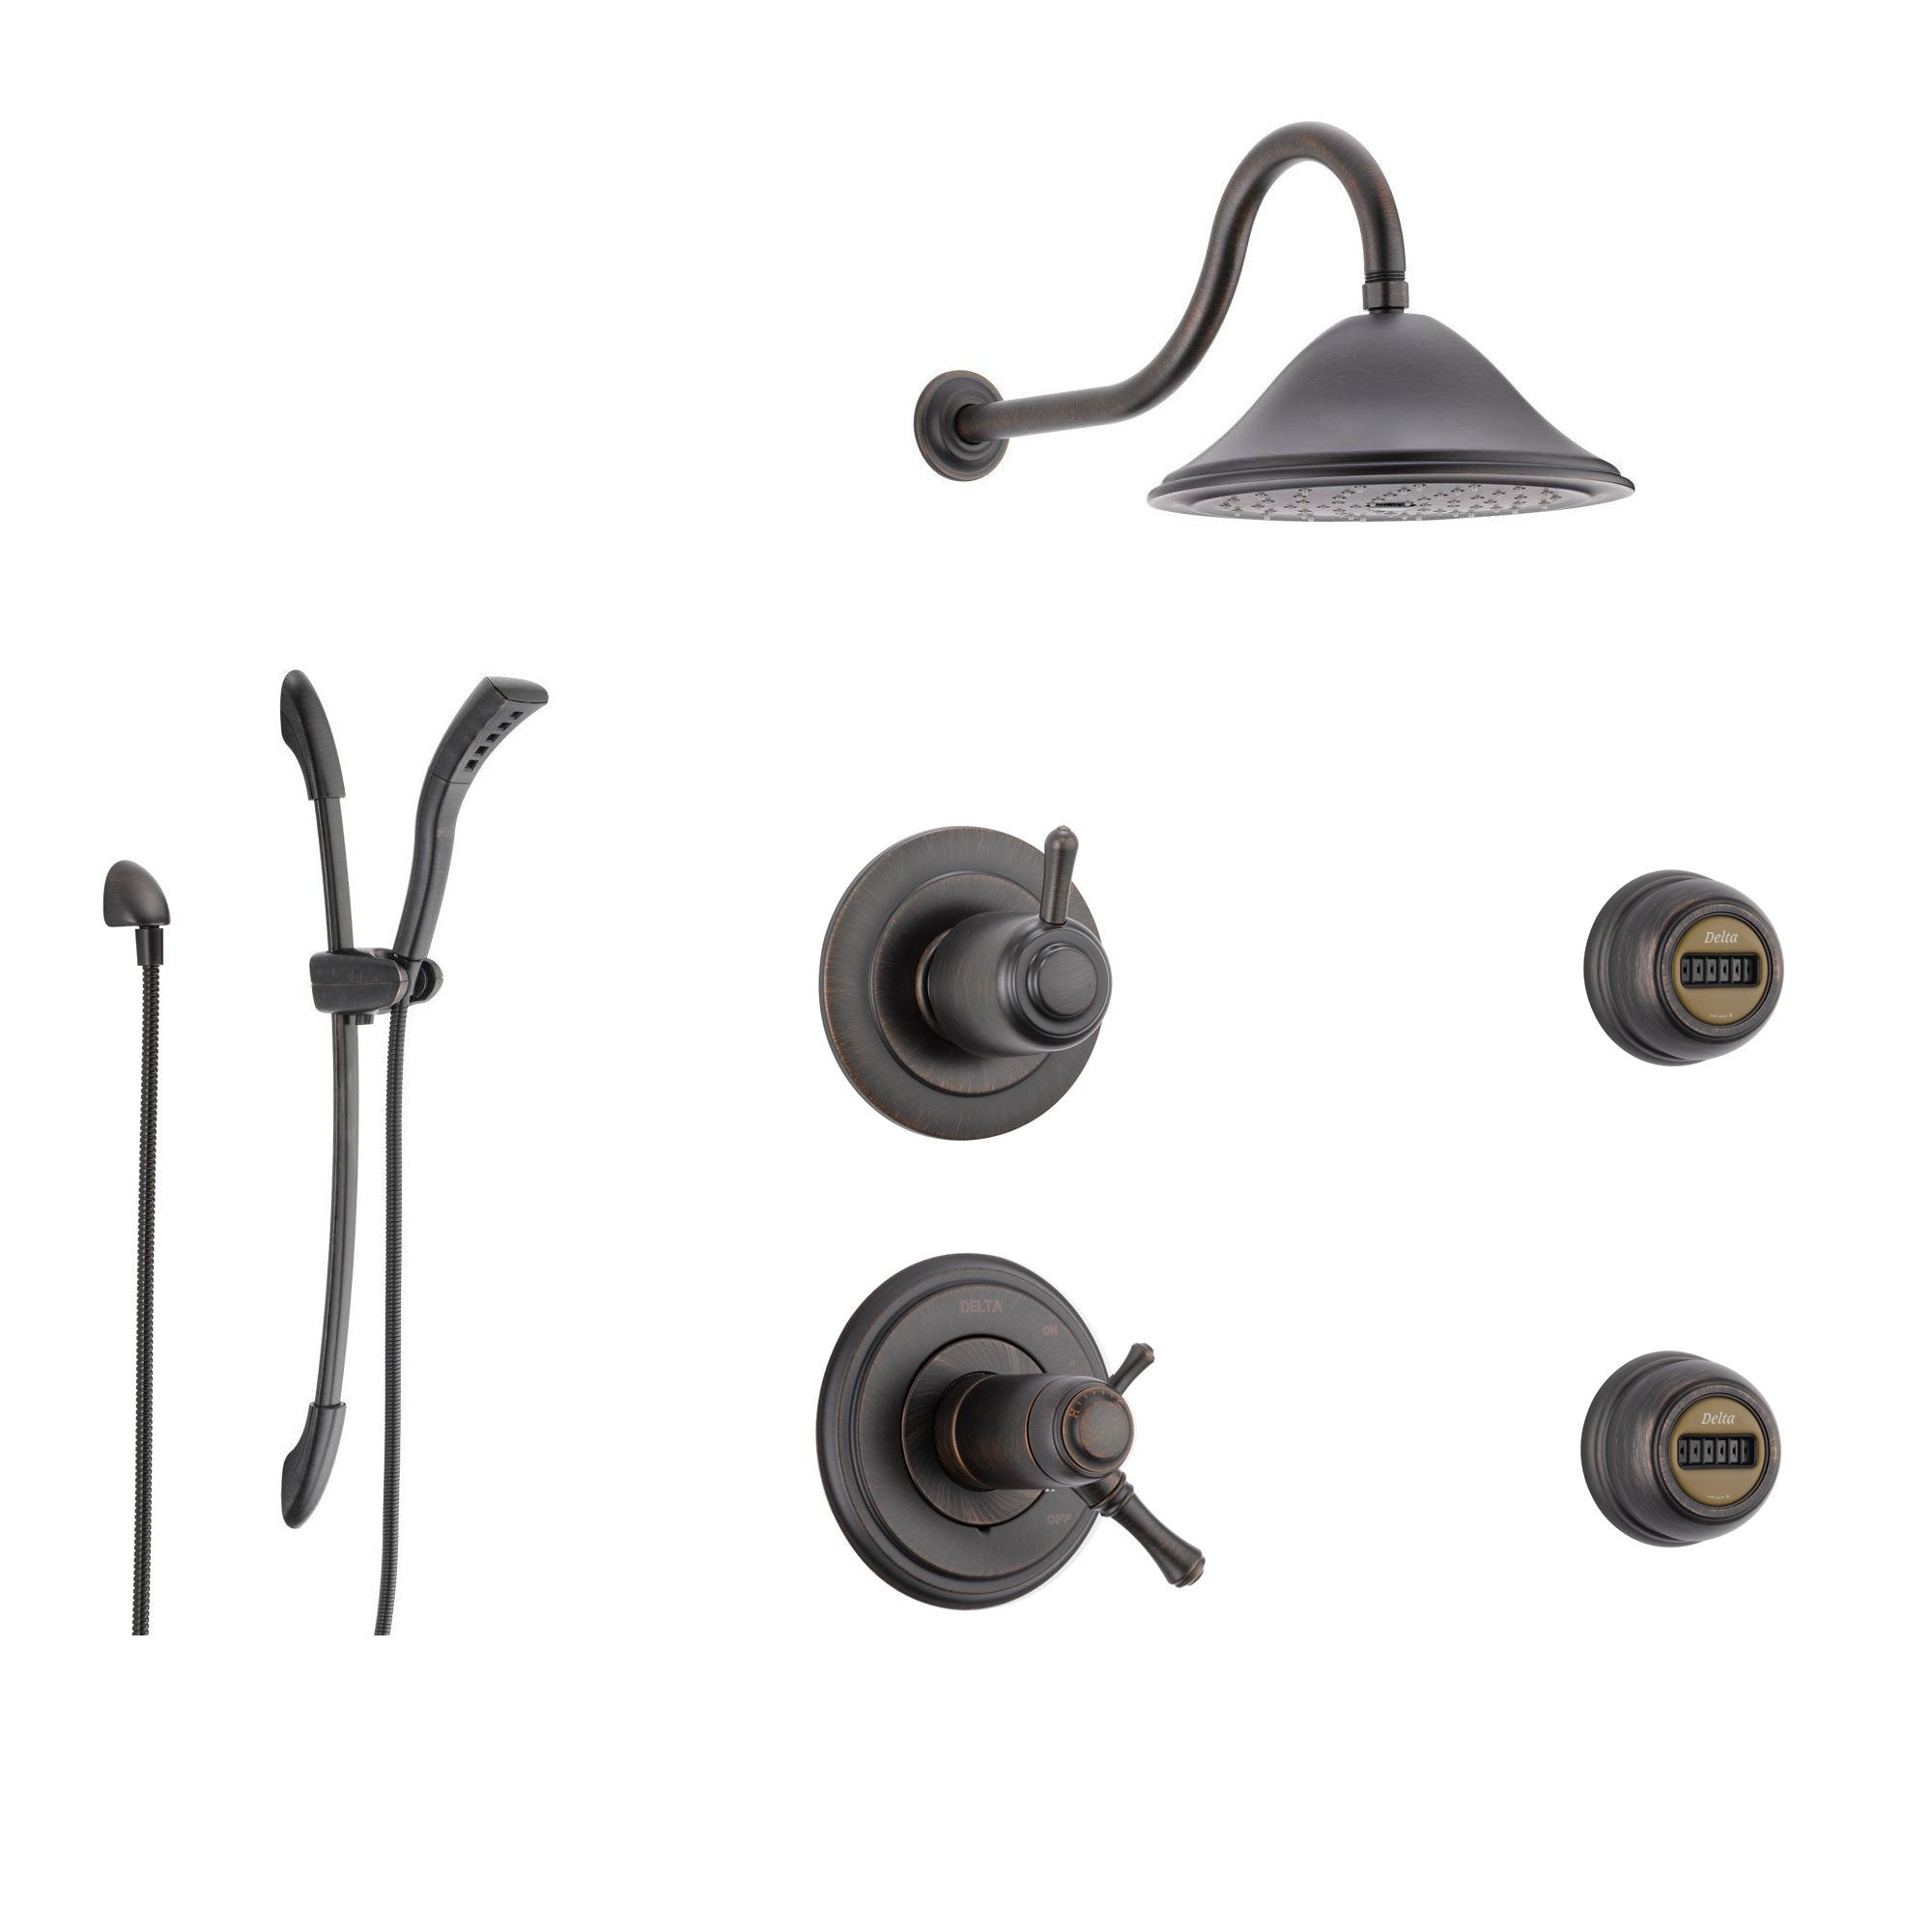 Delta Cassidy Venetian Bronze Shower System with Thermostatic Shower Handle, 6-setting Diverter, Large Rain Showerhead, Handheld Shower, and 2 Body Sprays SS17T9791RB